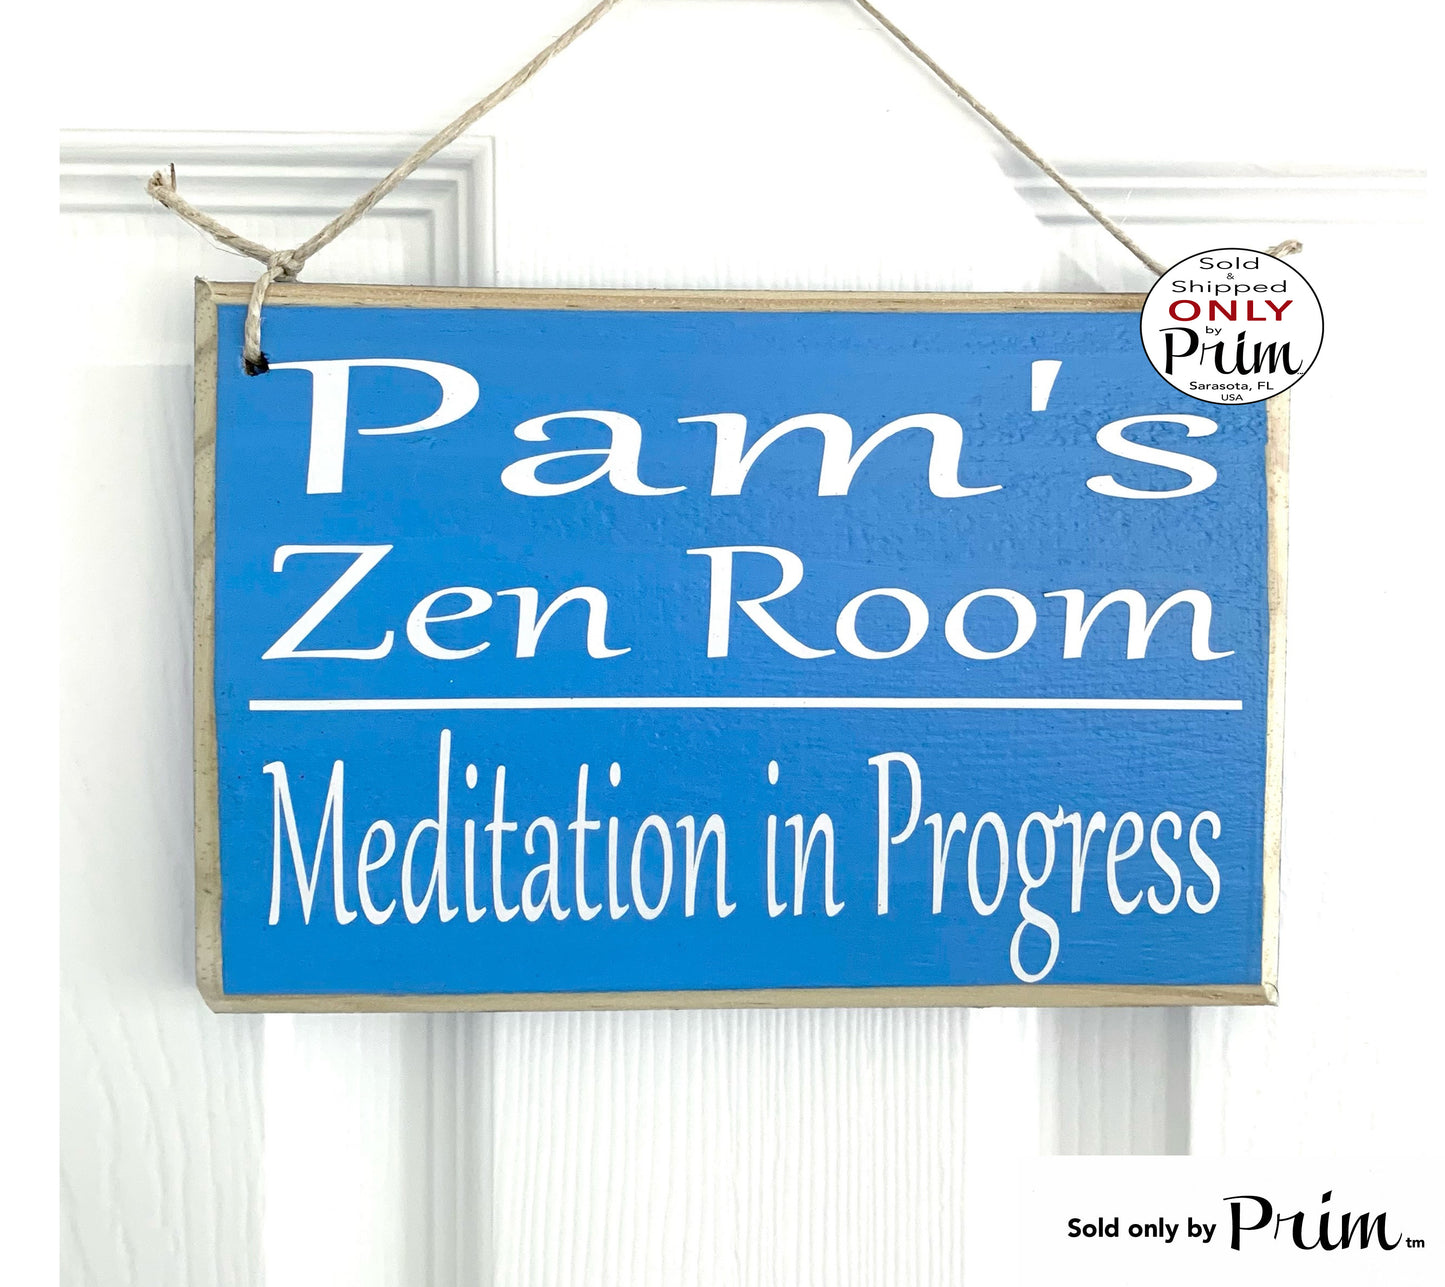 Designs by Prim 8x6 Personalized Name Zen Room Meditation in Progress Custom Wood Sign Yoga Meditating Please Do Not Disturb In Session Shhh Door Plaque